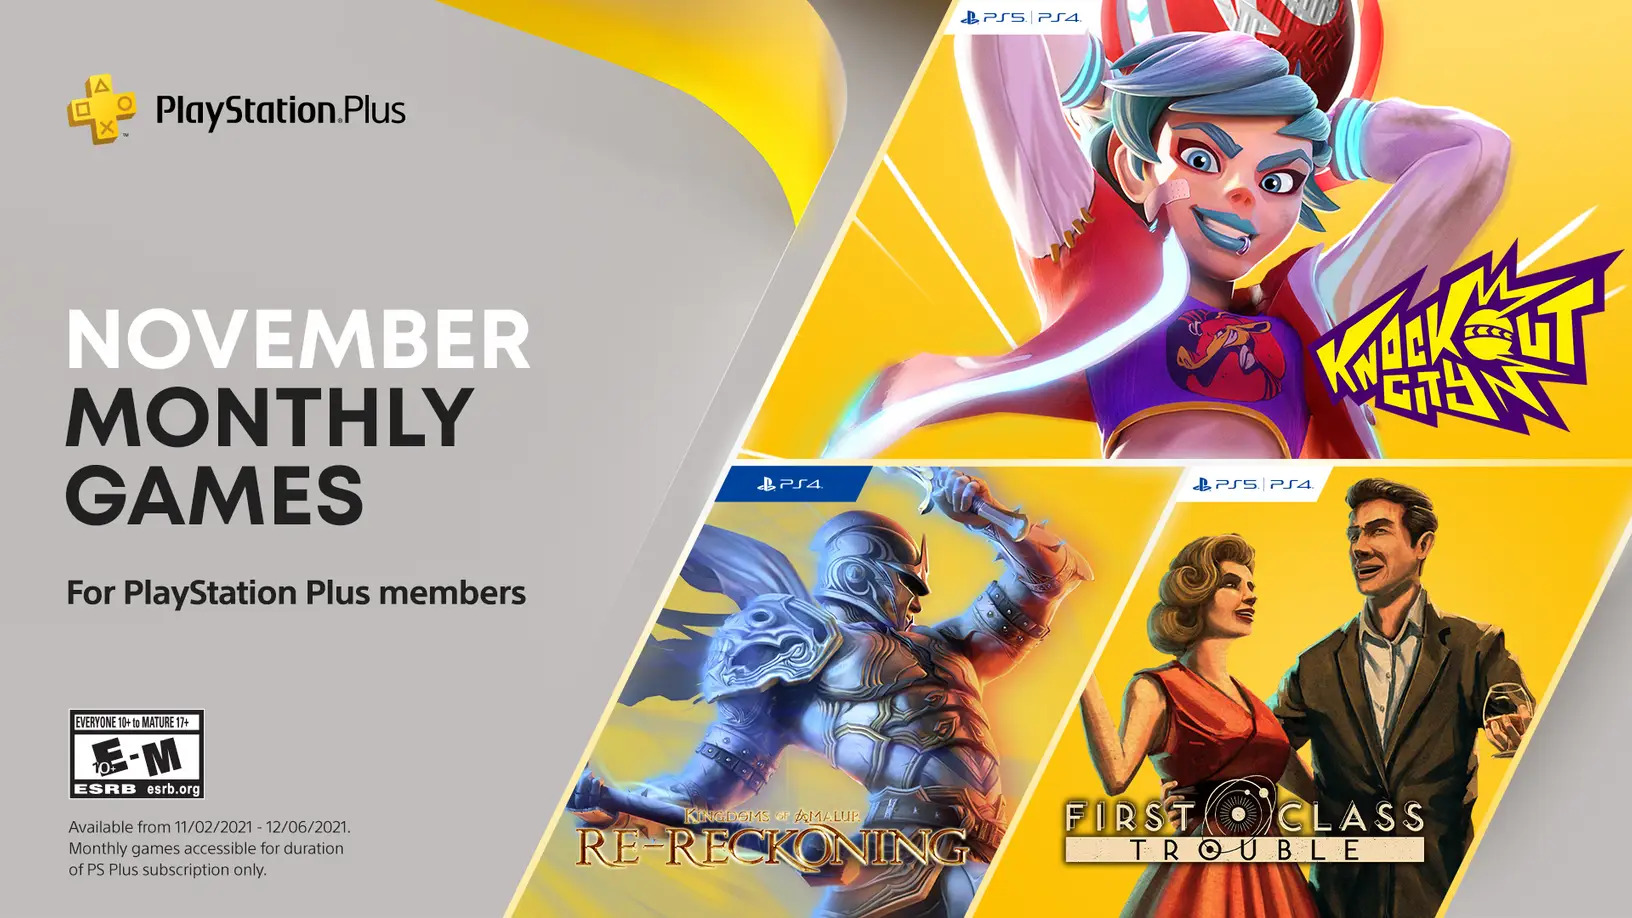 PlayStation Plus Free Games for November 2021 Announced, 6 Games to Be